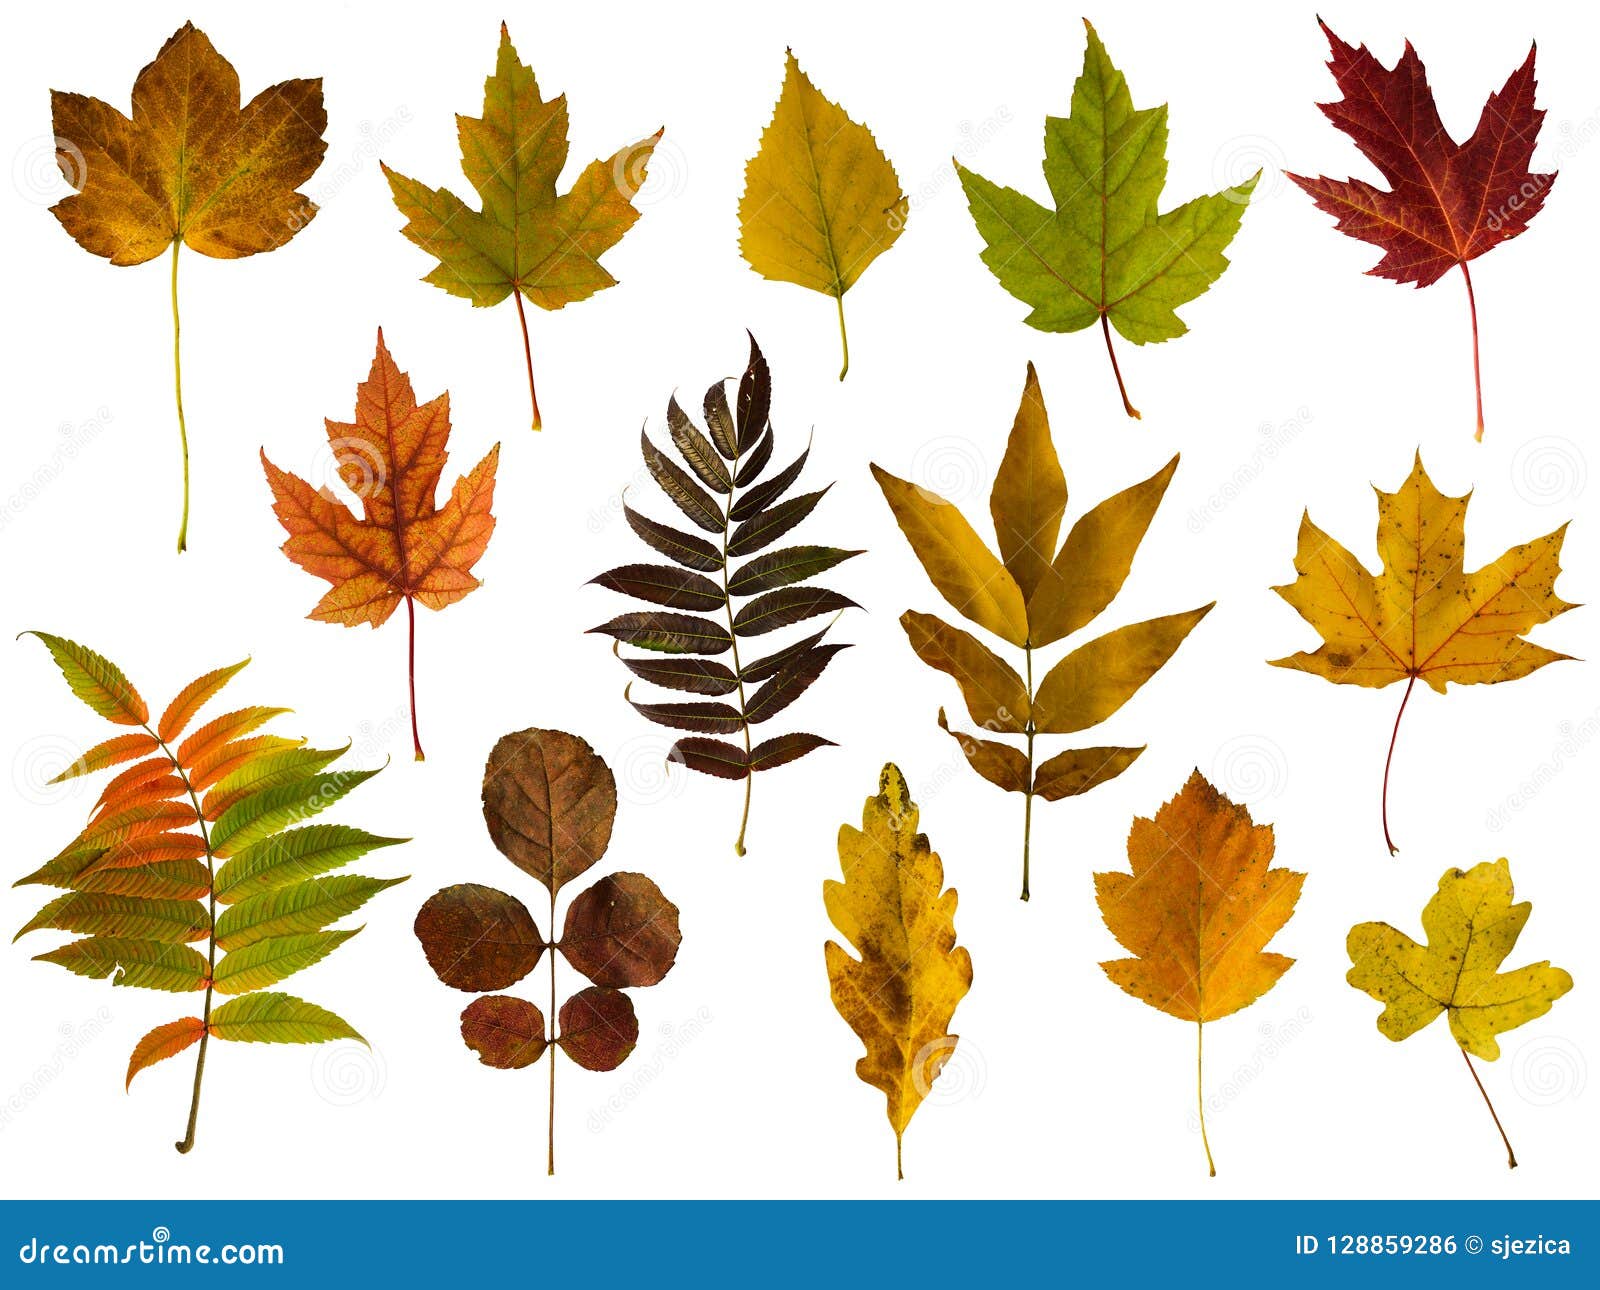 1,933 Leaves Png Stock Photos - Free & Royalty-Free Stock Photos from  Dreamstime